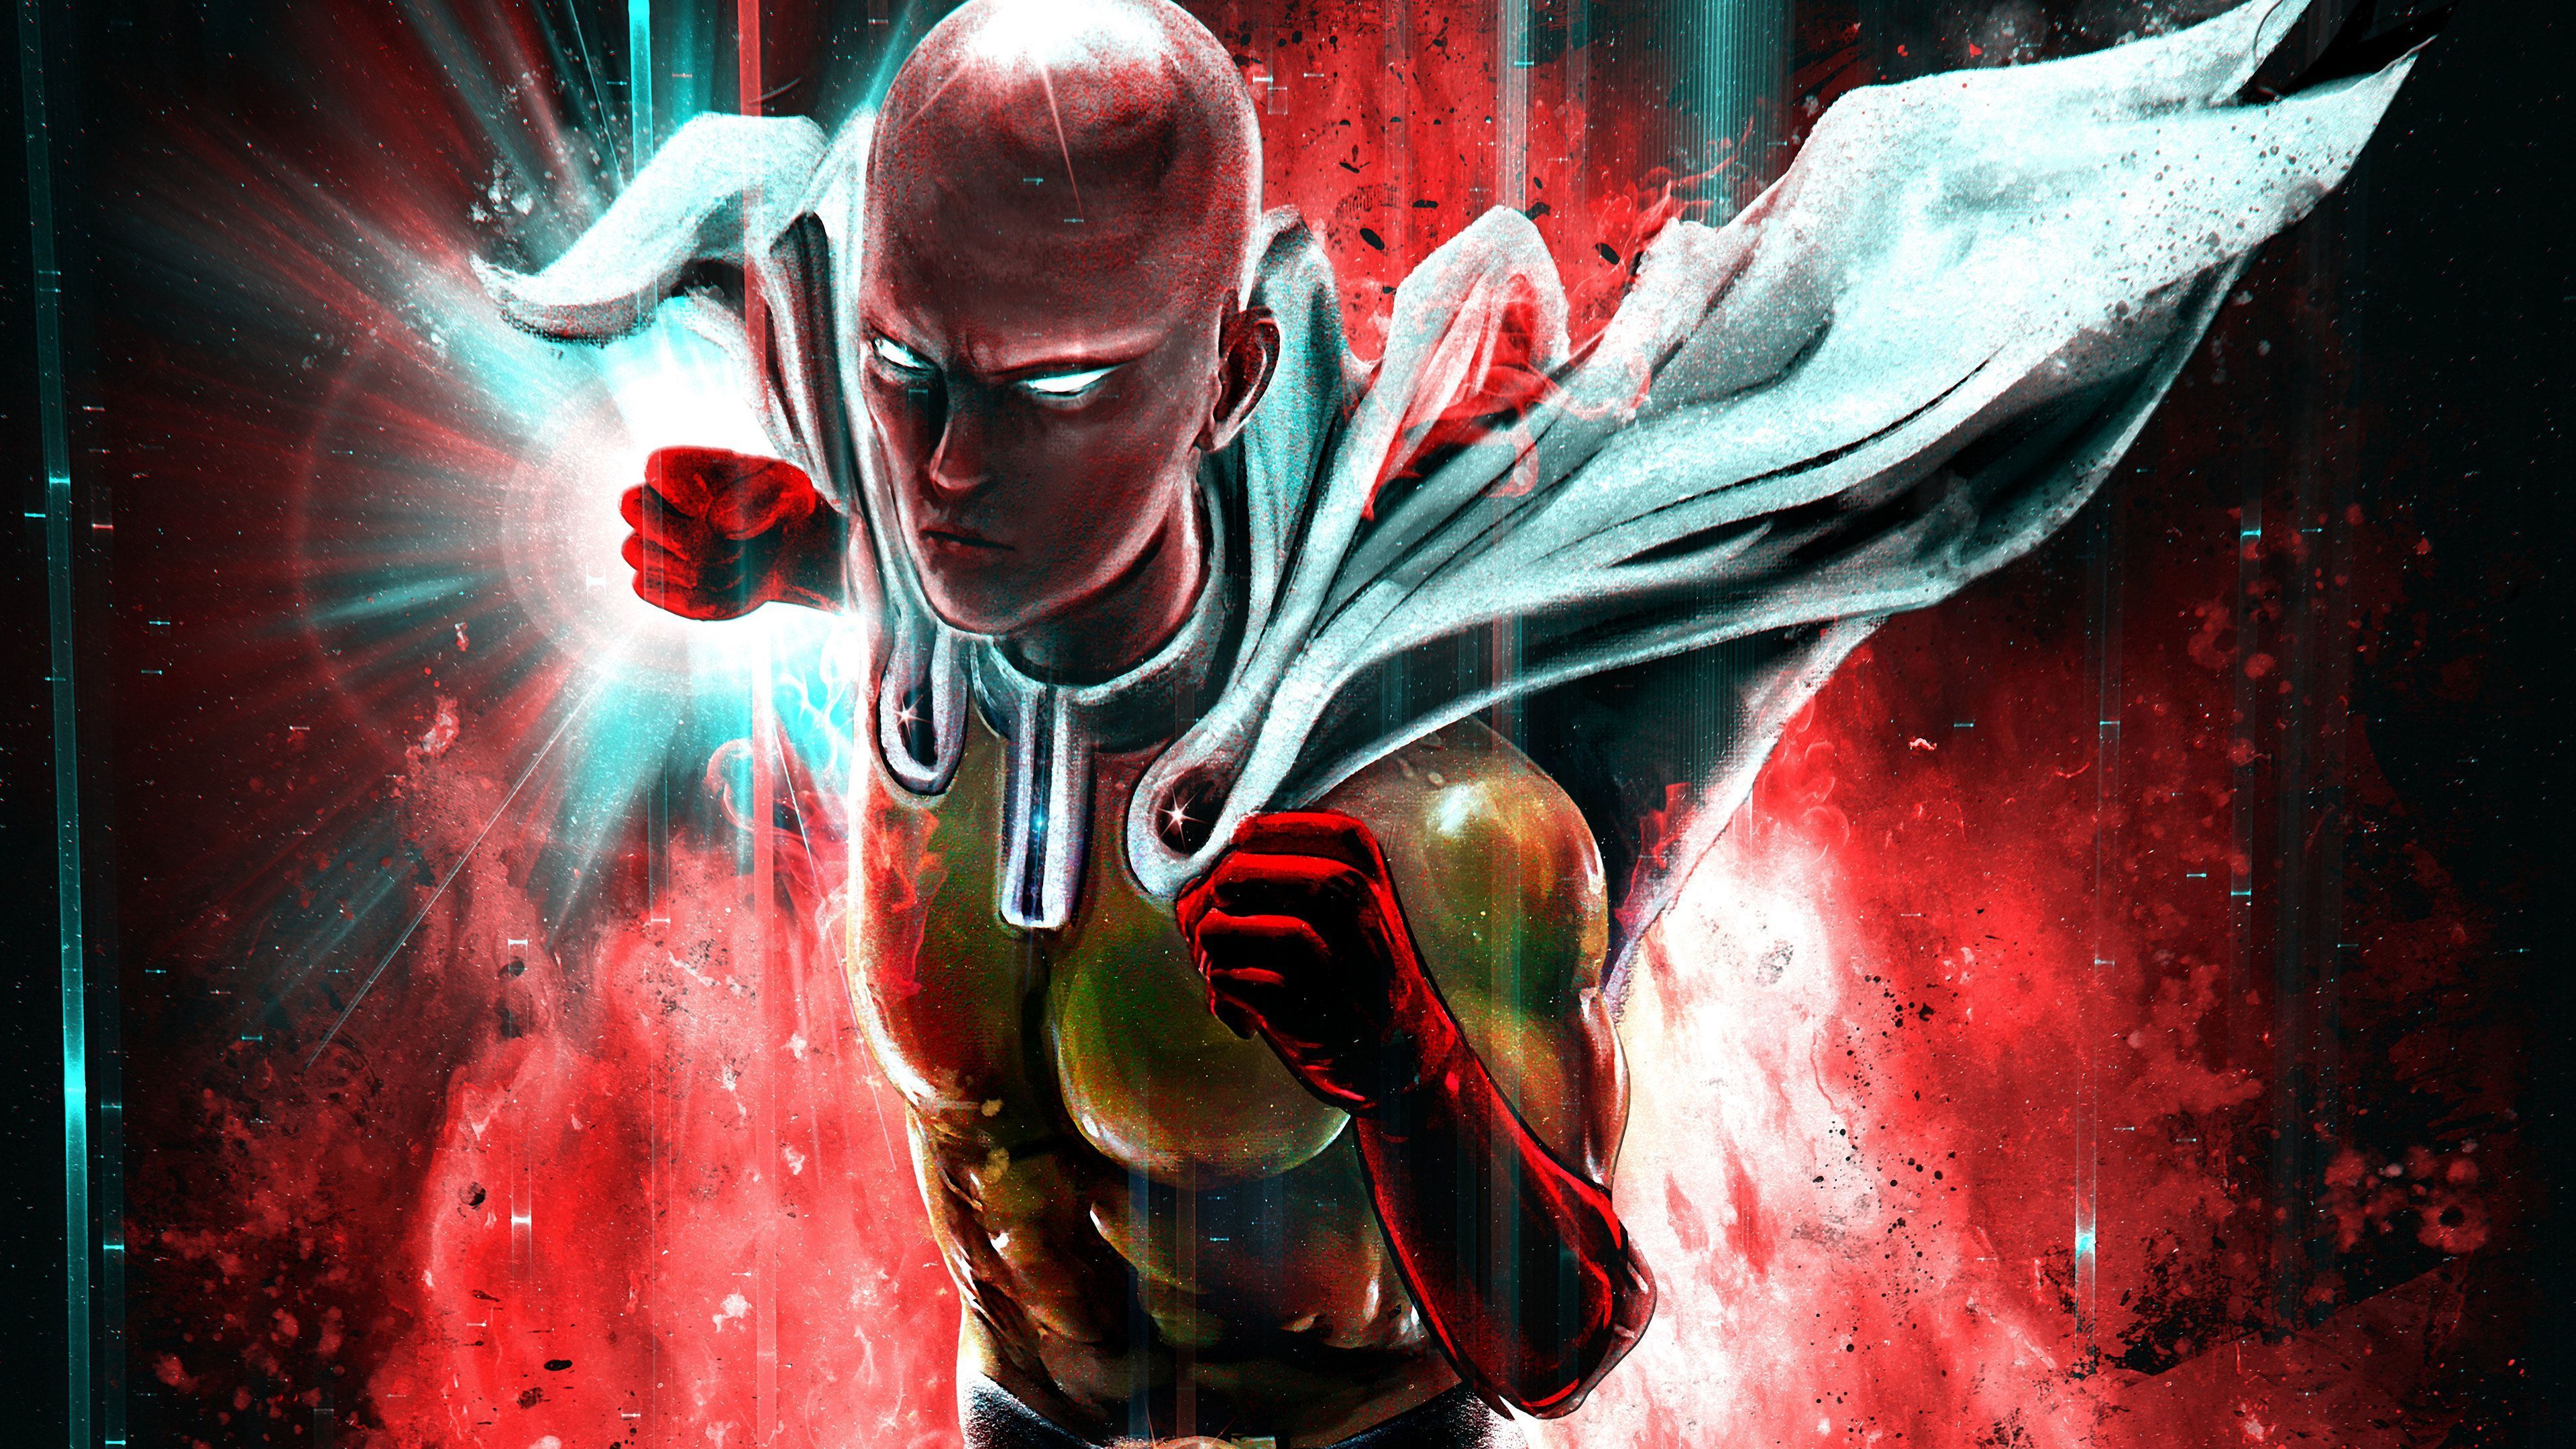 One Punch Man Hd Wallpapers For Pc - Wallpaperforu